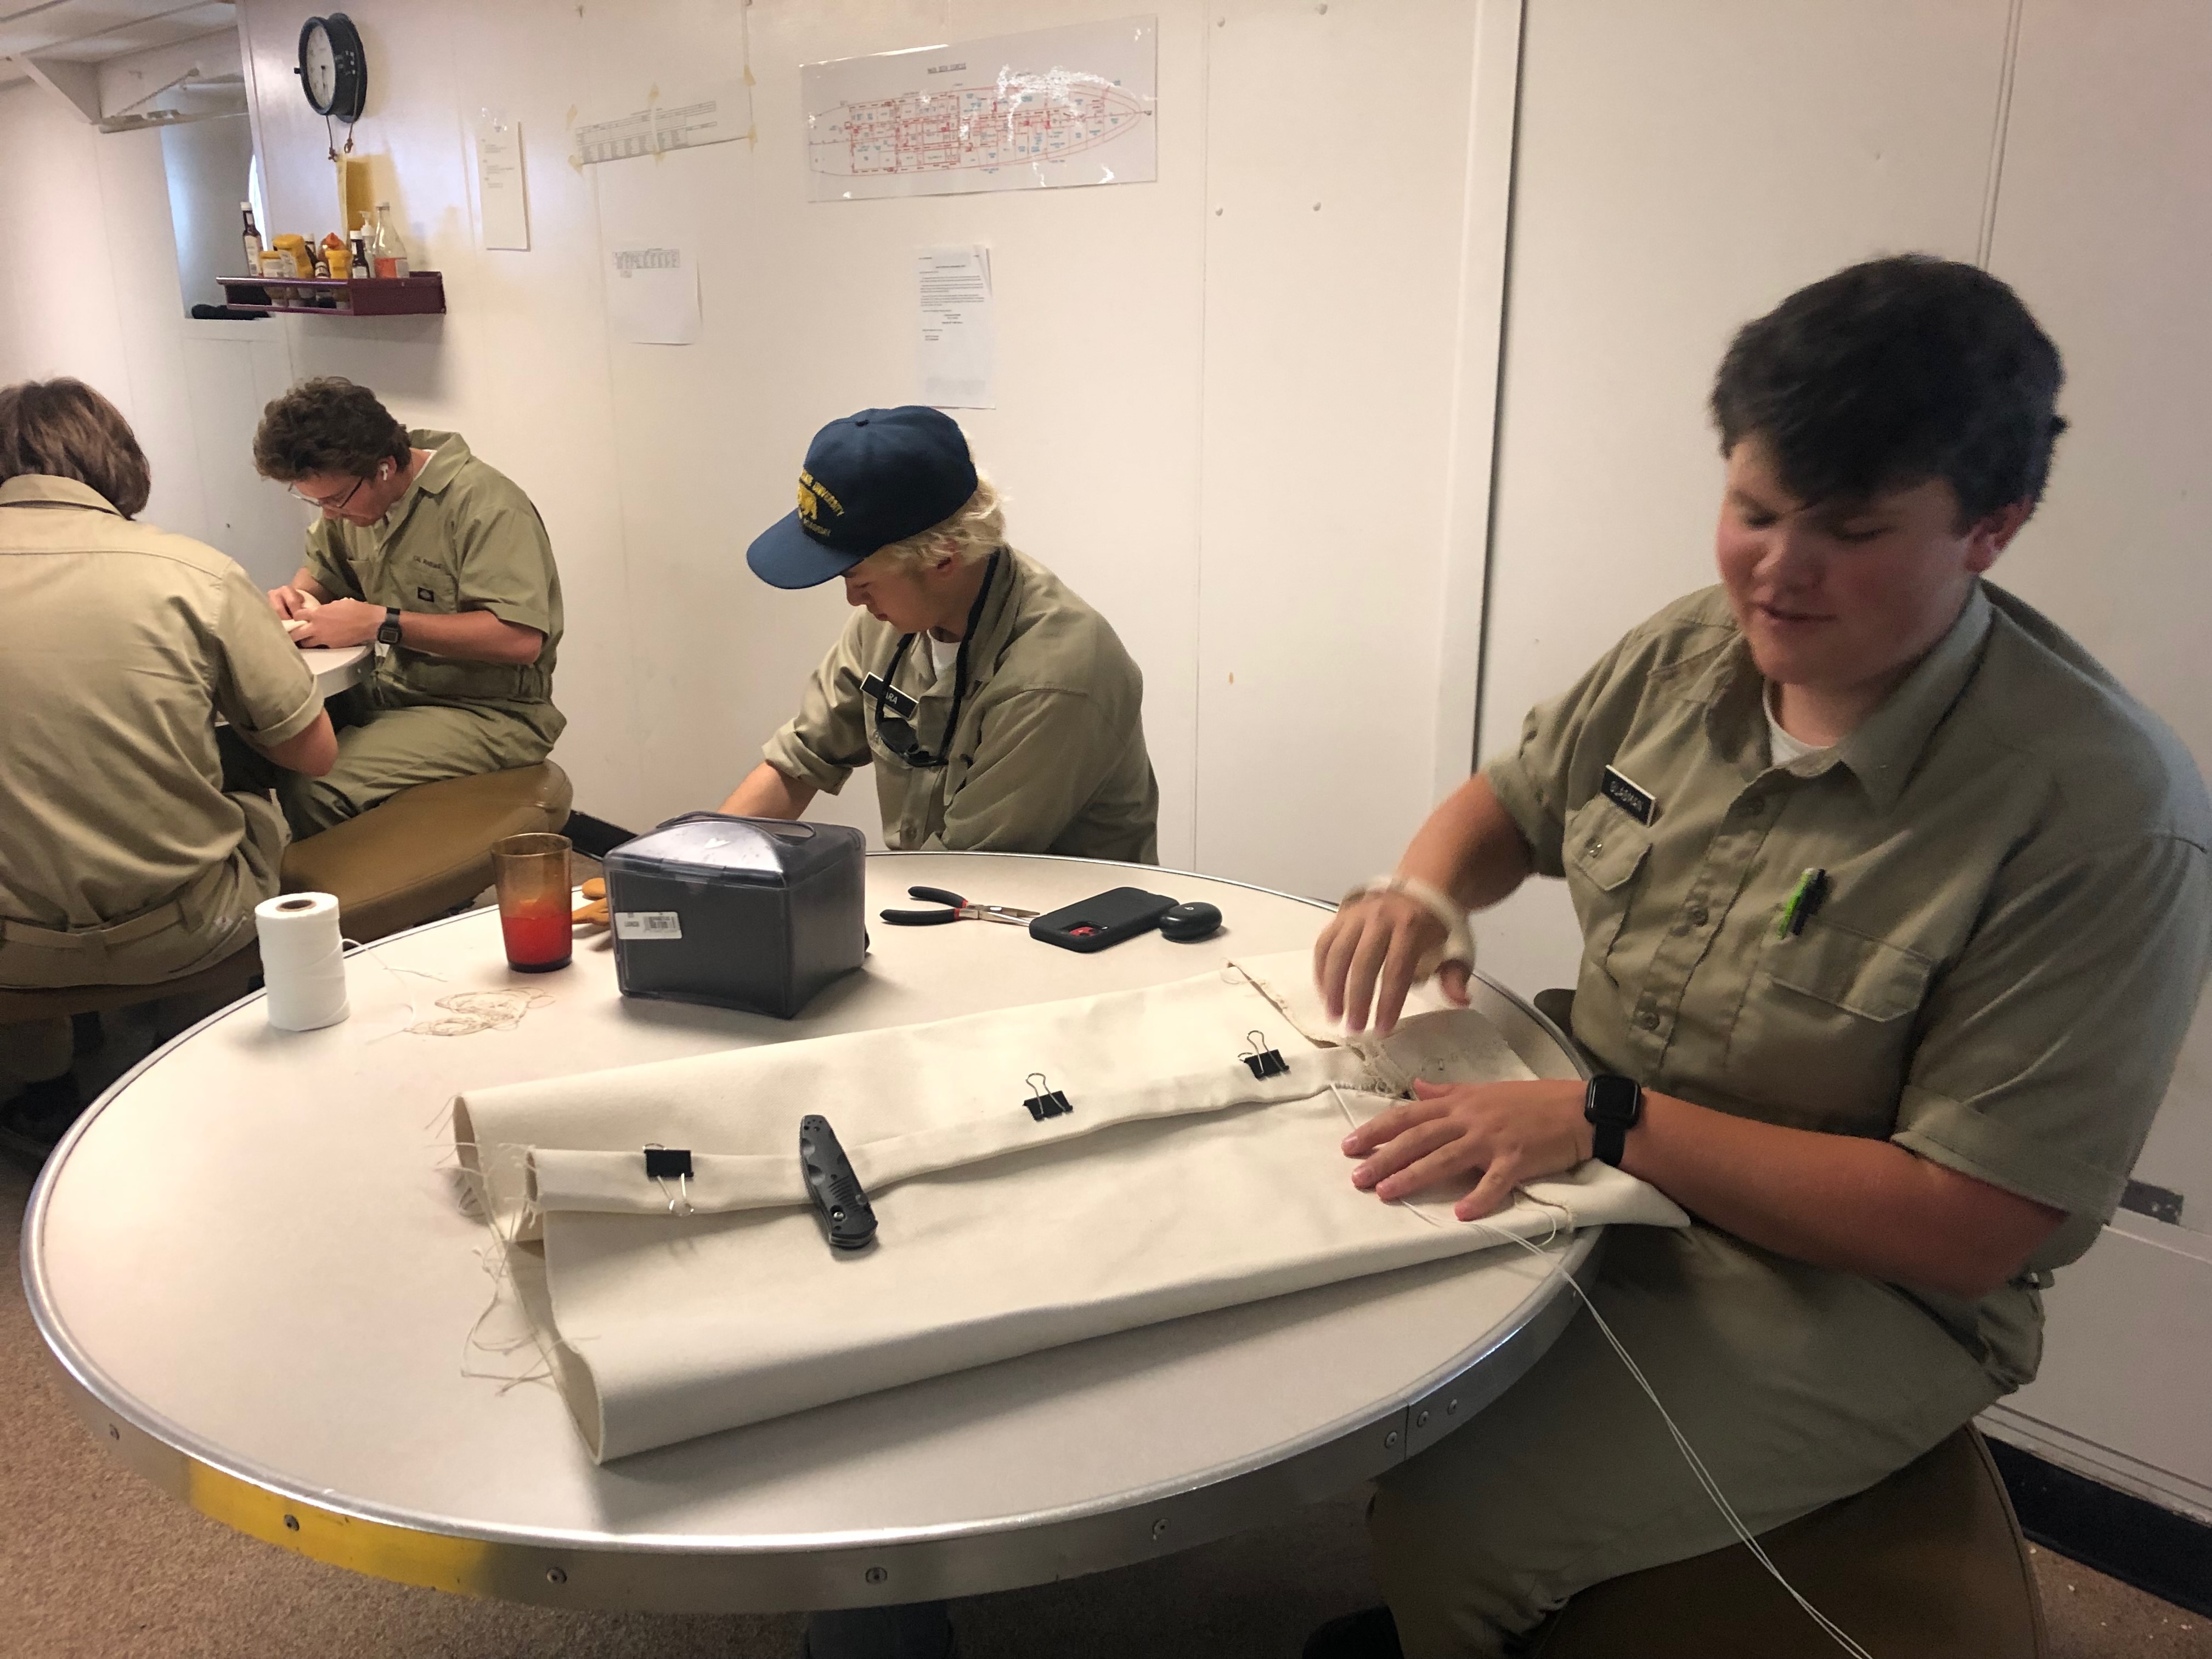 Cadets work on their canvas bags much like sailors from the days of tall ships all the way to World War II, and into the 21st century